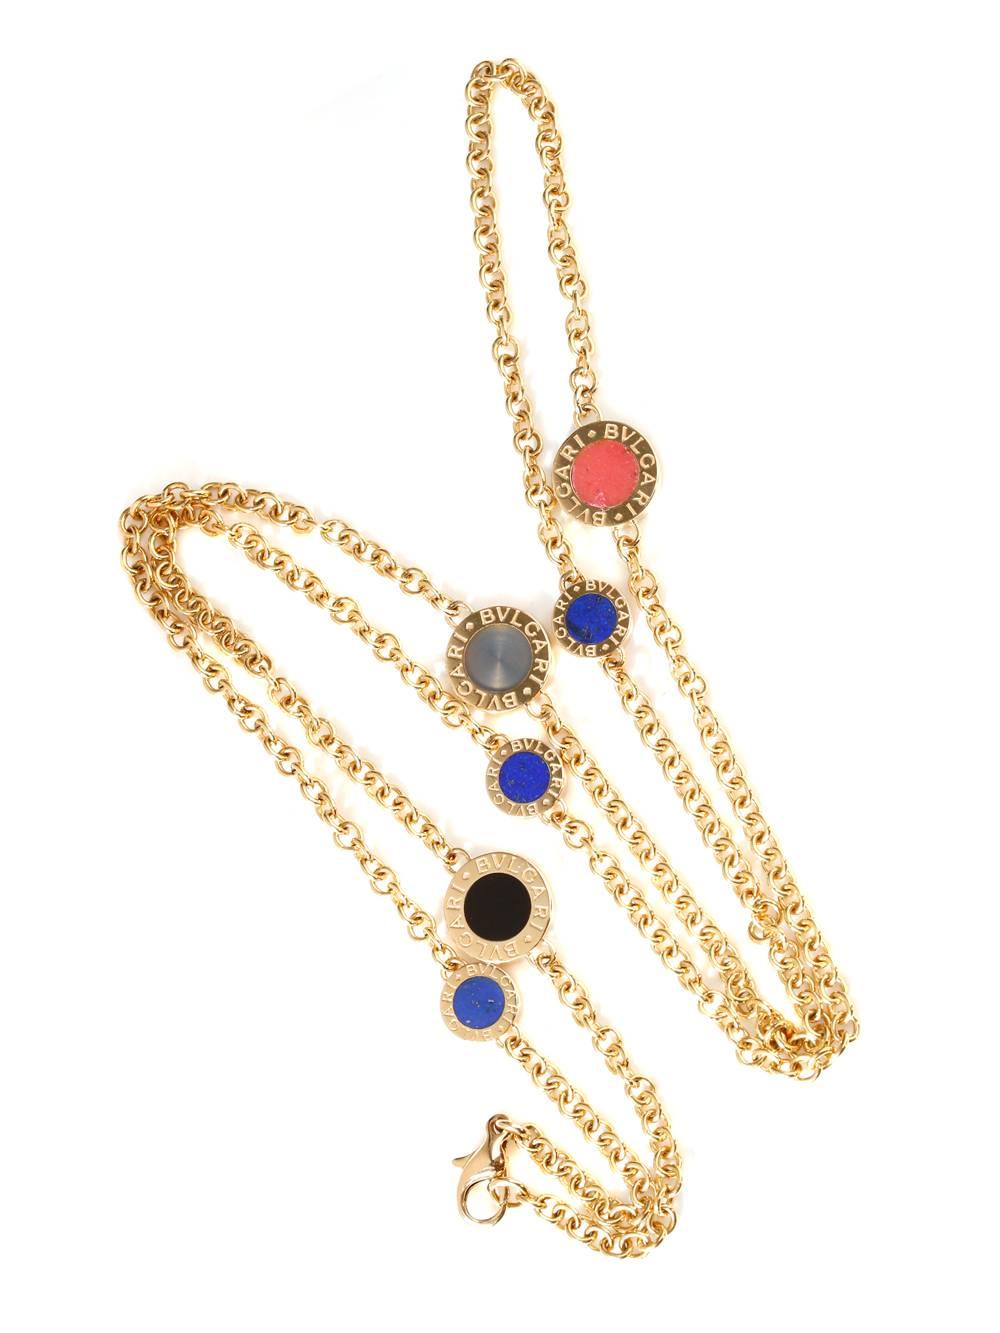 Yellow gold links and precious stones form this daring necklace. Meticulously crafted links are the accessory’s base while the designer’s name is a prominent feature. Enhancing the piece are onyx, coral and lapis. These stones are displayed within a